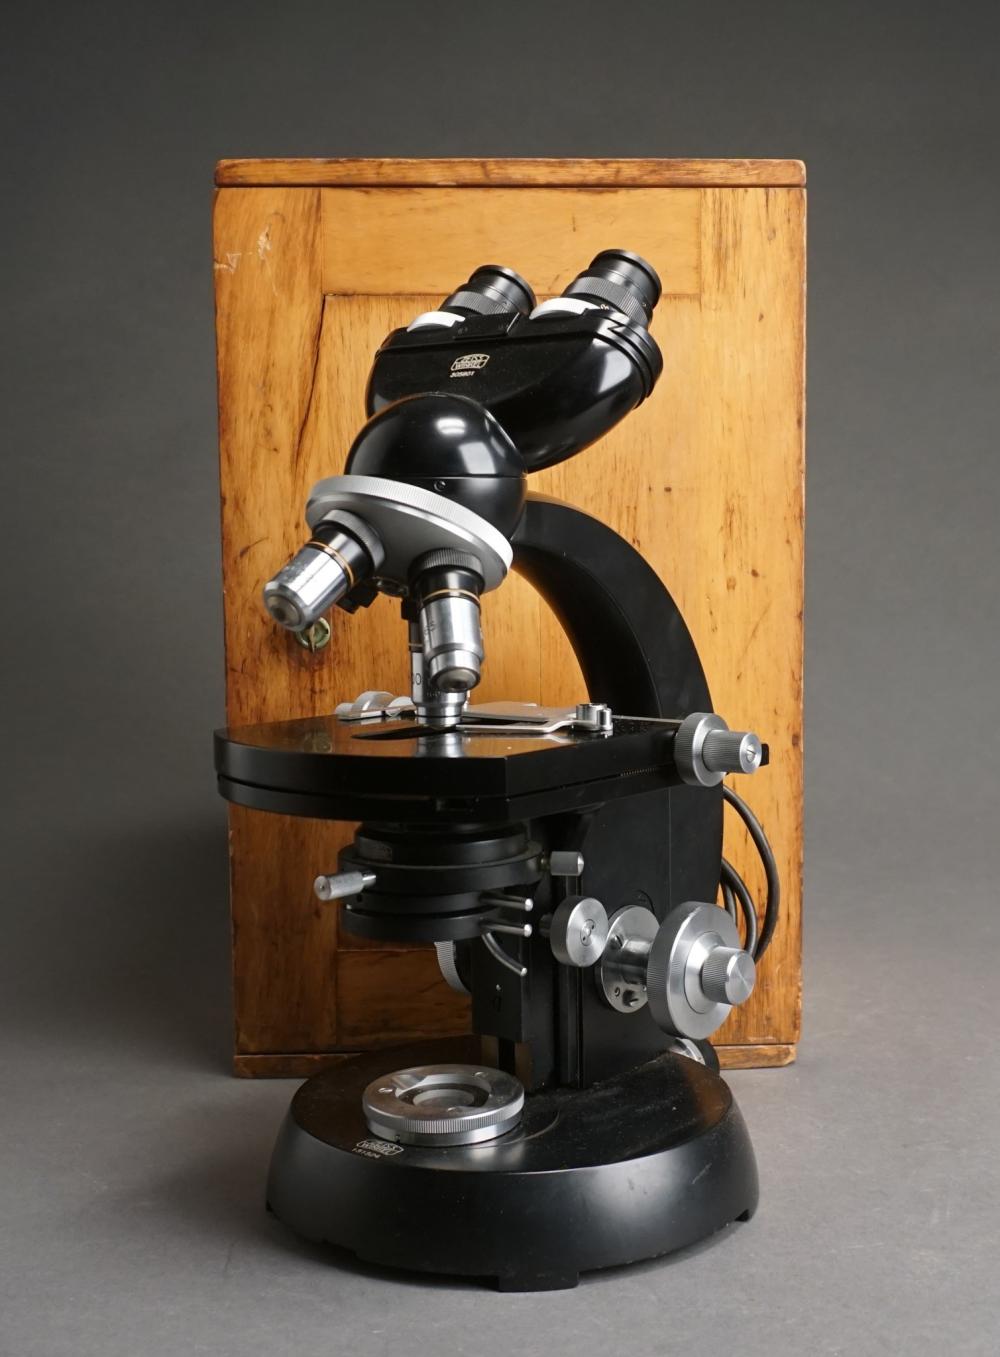 ZEISS MICROSCOPE WITH WOOD CARRY